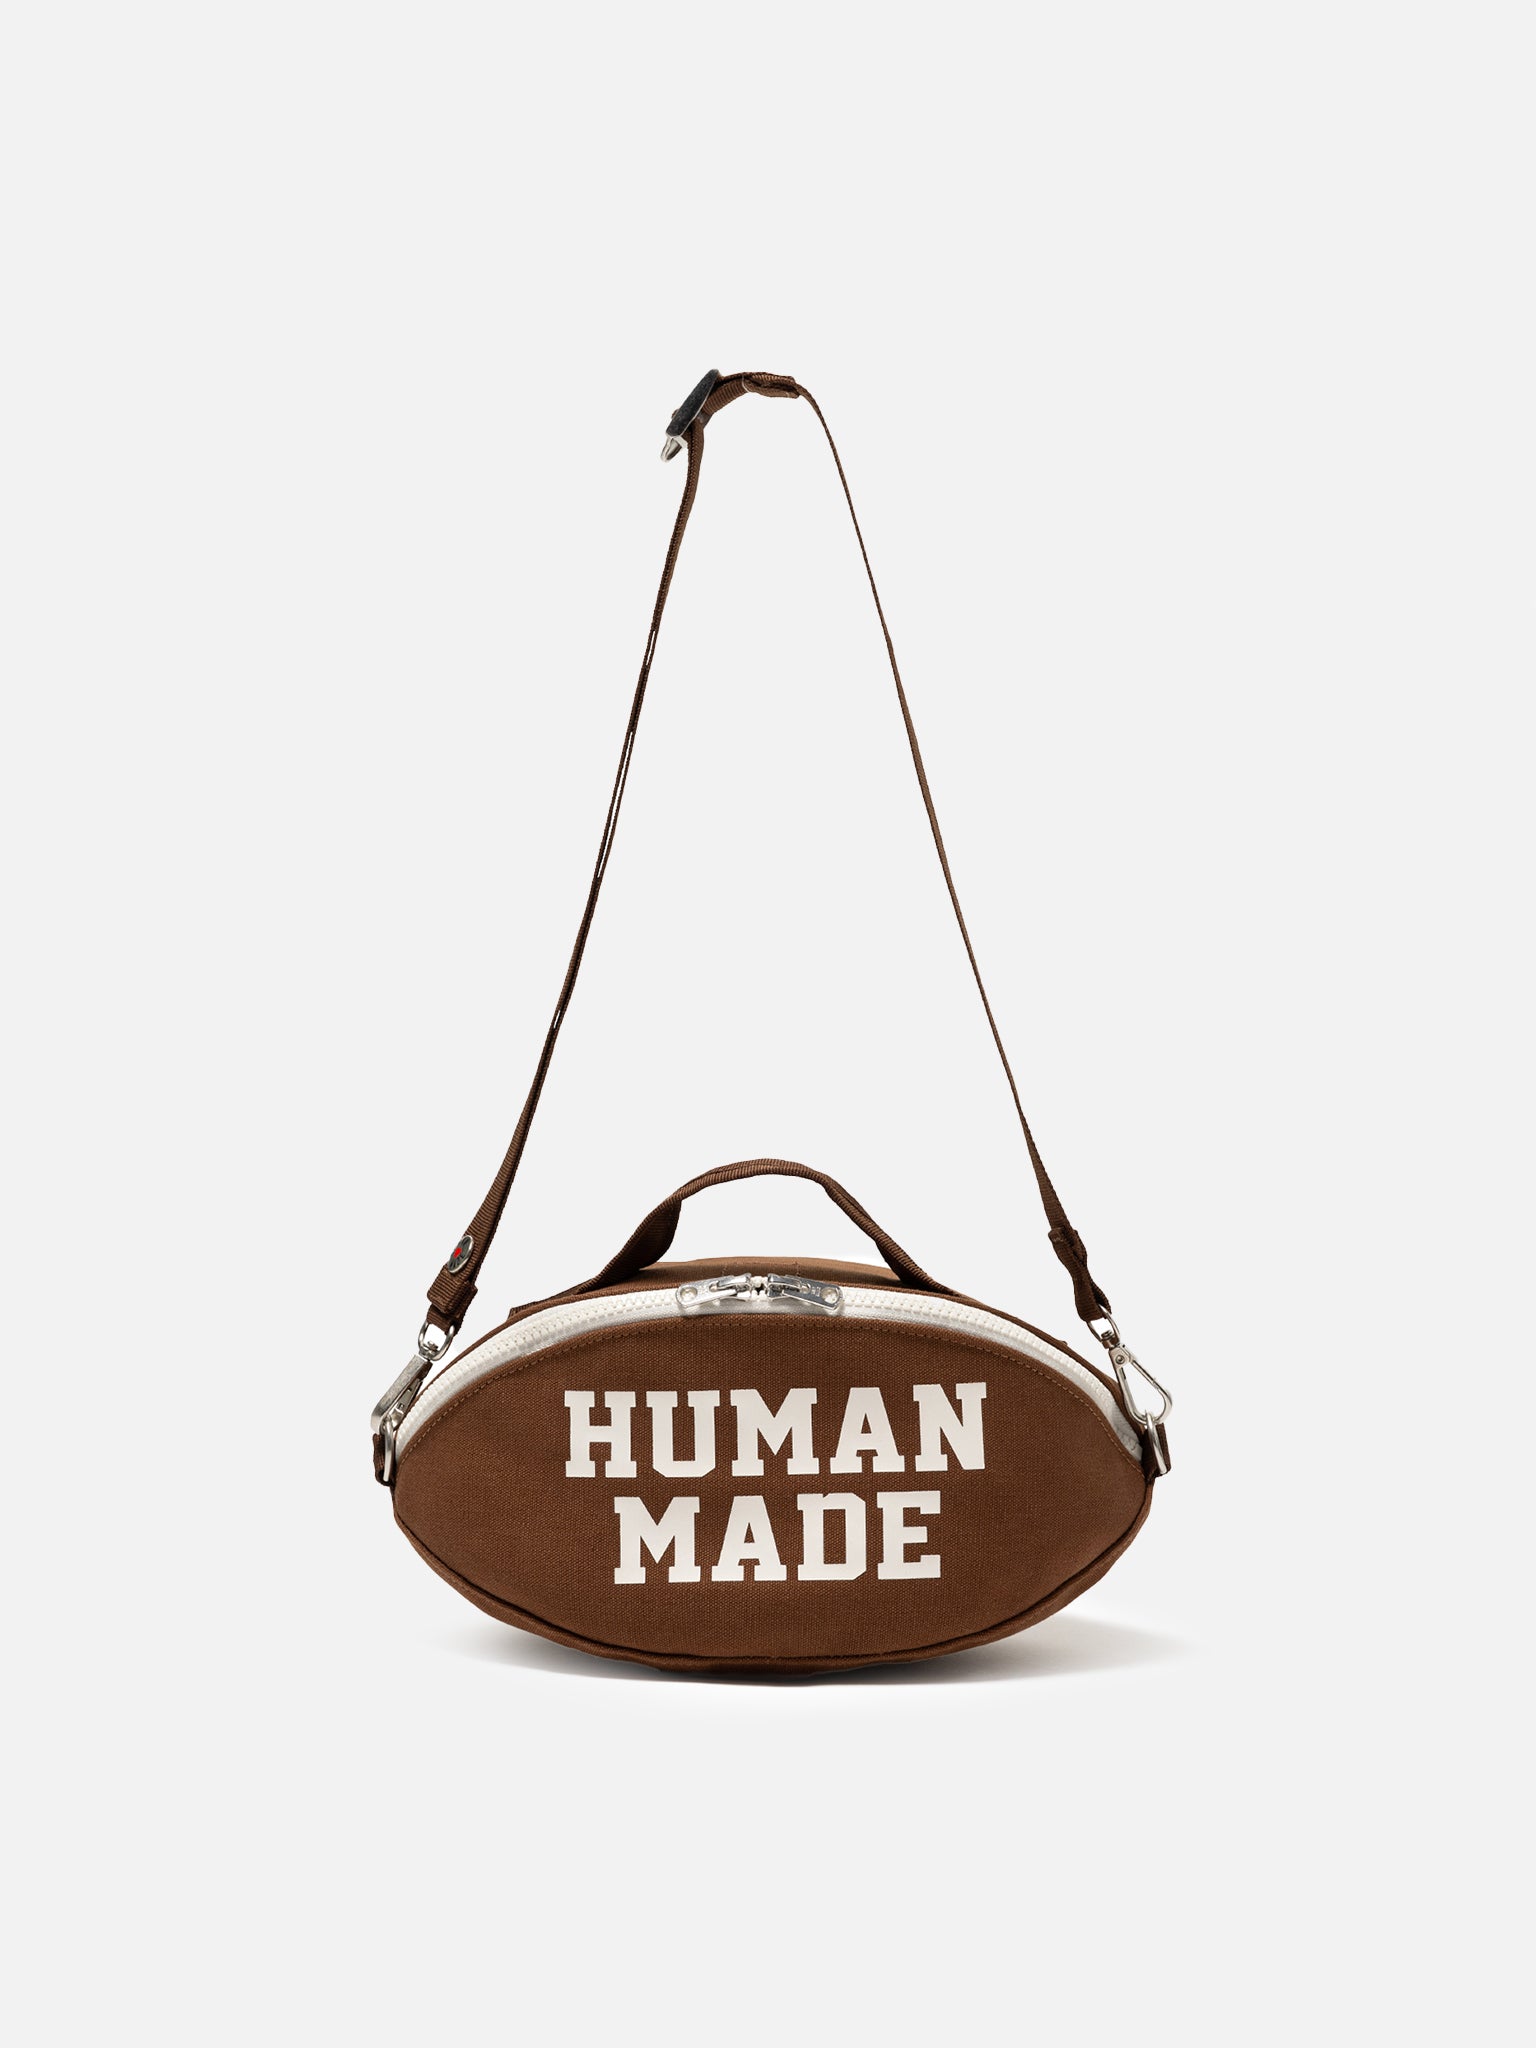 Human Made Rugby Bag